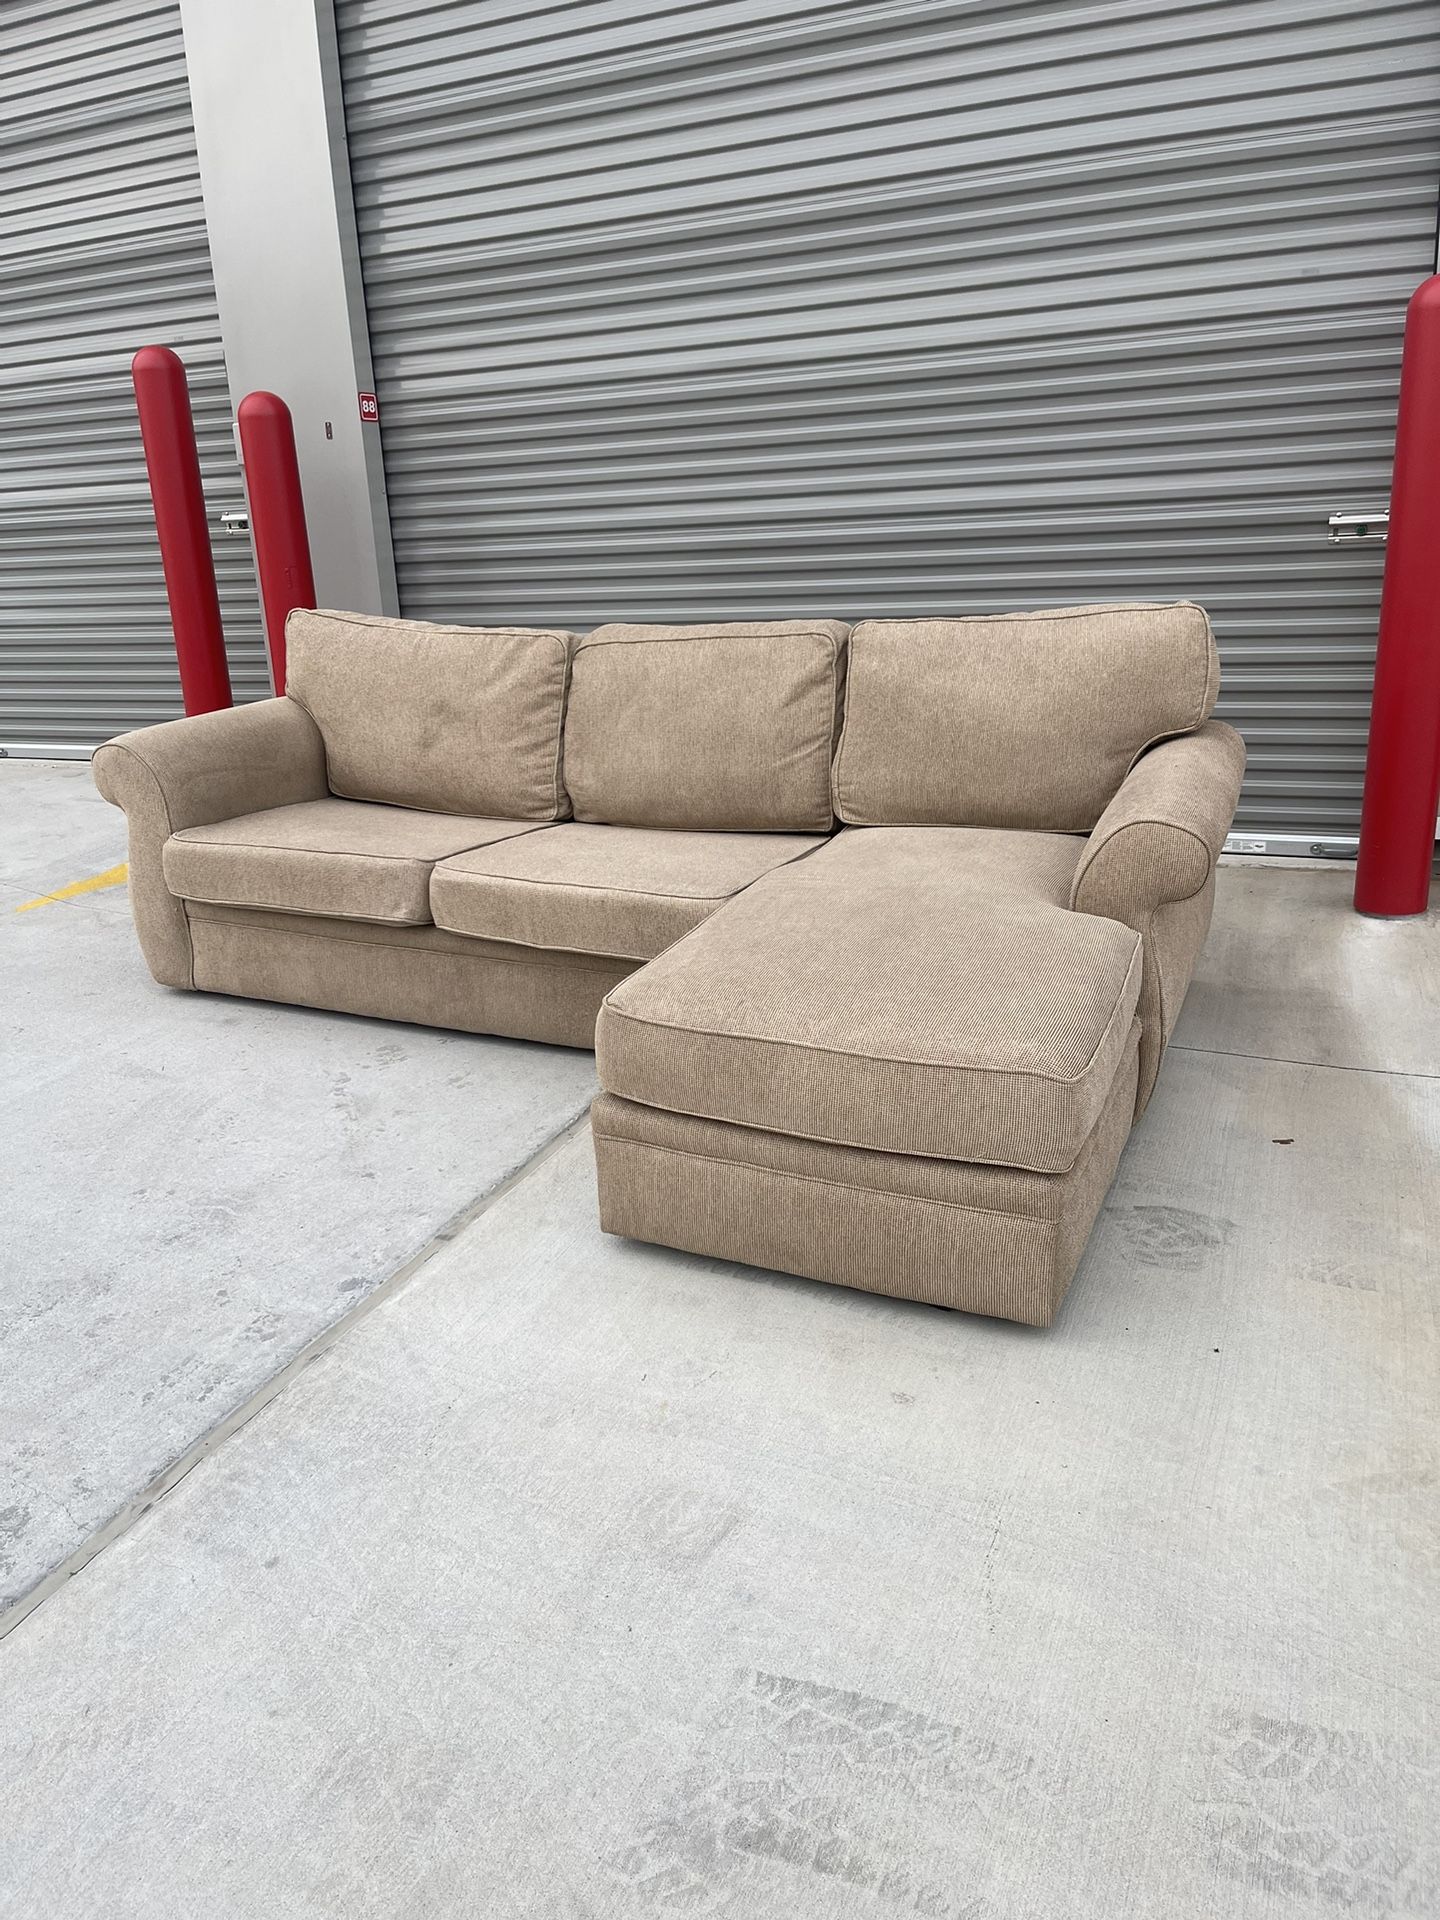 Tan Sectional Couch